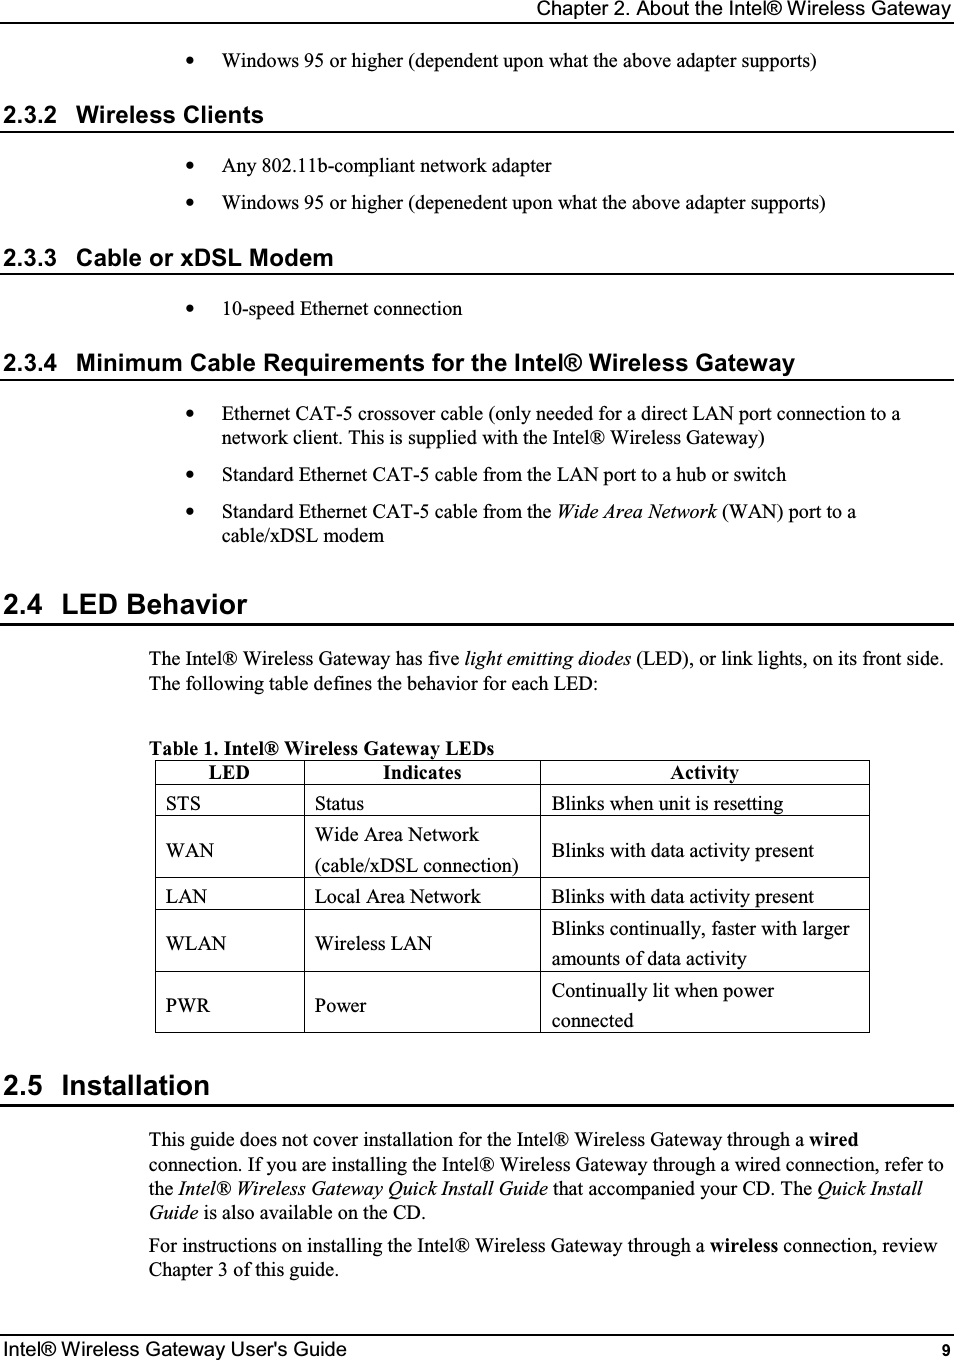 Chapter 2. About the Intel® Wireless Gateway Intel® Wireless Gateway User&apos;s Guide  9 •  Windows 95 or higher (dependent upon what the above adapter supports) 2.3.2  Wireless Clients •  Any 802.11b-compliant network adapter •  Windows 95 or higher (depenedent upon what the above adapter supports) 2.3.3  Cable or xDSL Modem •  10-speed Ethernet connection 2.3.4  Minimum Cable Requirements for the Intel® Wireless Gateway •  Ethernet CAT-5 crossover cable (only needed for a direct LAN port connection to a network client. This is supplied with the Intel® Wireless Gateway) •  Standard Ethernet CAT-5 cable from the LAN port to a hub or switch •  Standard Ethernet CAT-5 cable from the Wide Area Network (WAN) port to a cable/xDSL modem 2.4  LED Behavior The Intel® Wireless Gateway has five light emitting diodes (LED), or link lights, on its front side. The following table defines the behavior for each LED:  Table 1. Intel® Wireless Gateway LEDs LED  Indicates  Activity STS  Status  Blinks when unit is resetting WAN  Wide Area Network (cable/xDSL connection)  Blinks with data activity present LAN  Local Area Network  Blinks with data activity present WLAN  Wireless LAN  Blinks continually, faster with larger amounts of data activity PWR  Power  Continually lit when power connected 2.5  Installation This guide does not cover installation for the Intel® Wireless Gateway through a wired connection. If you are installing the Intel® Wireless Gateway through a wired connection, refer to the Intel® Wireless Gateway Quick Install Guide that accompanied your CD. The Quick Install Guide is also available on the CD. For instructions on installing the Intel® Wireless Gateway through a wireless connection, review Chapter 3 of this guide. 